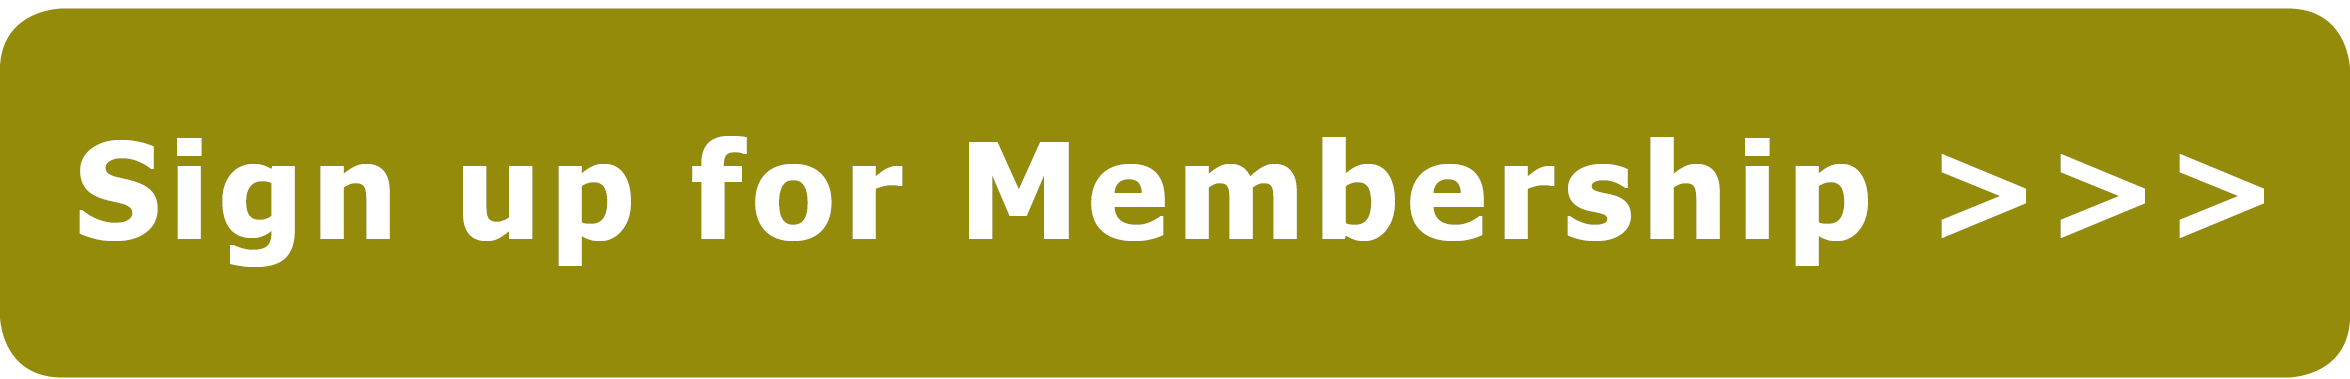 Button: Sign up for Membership